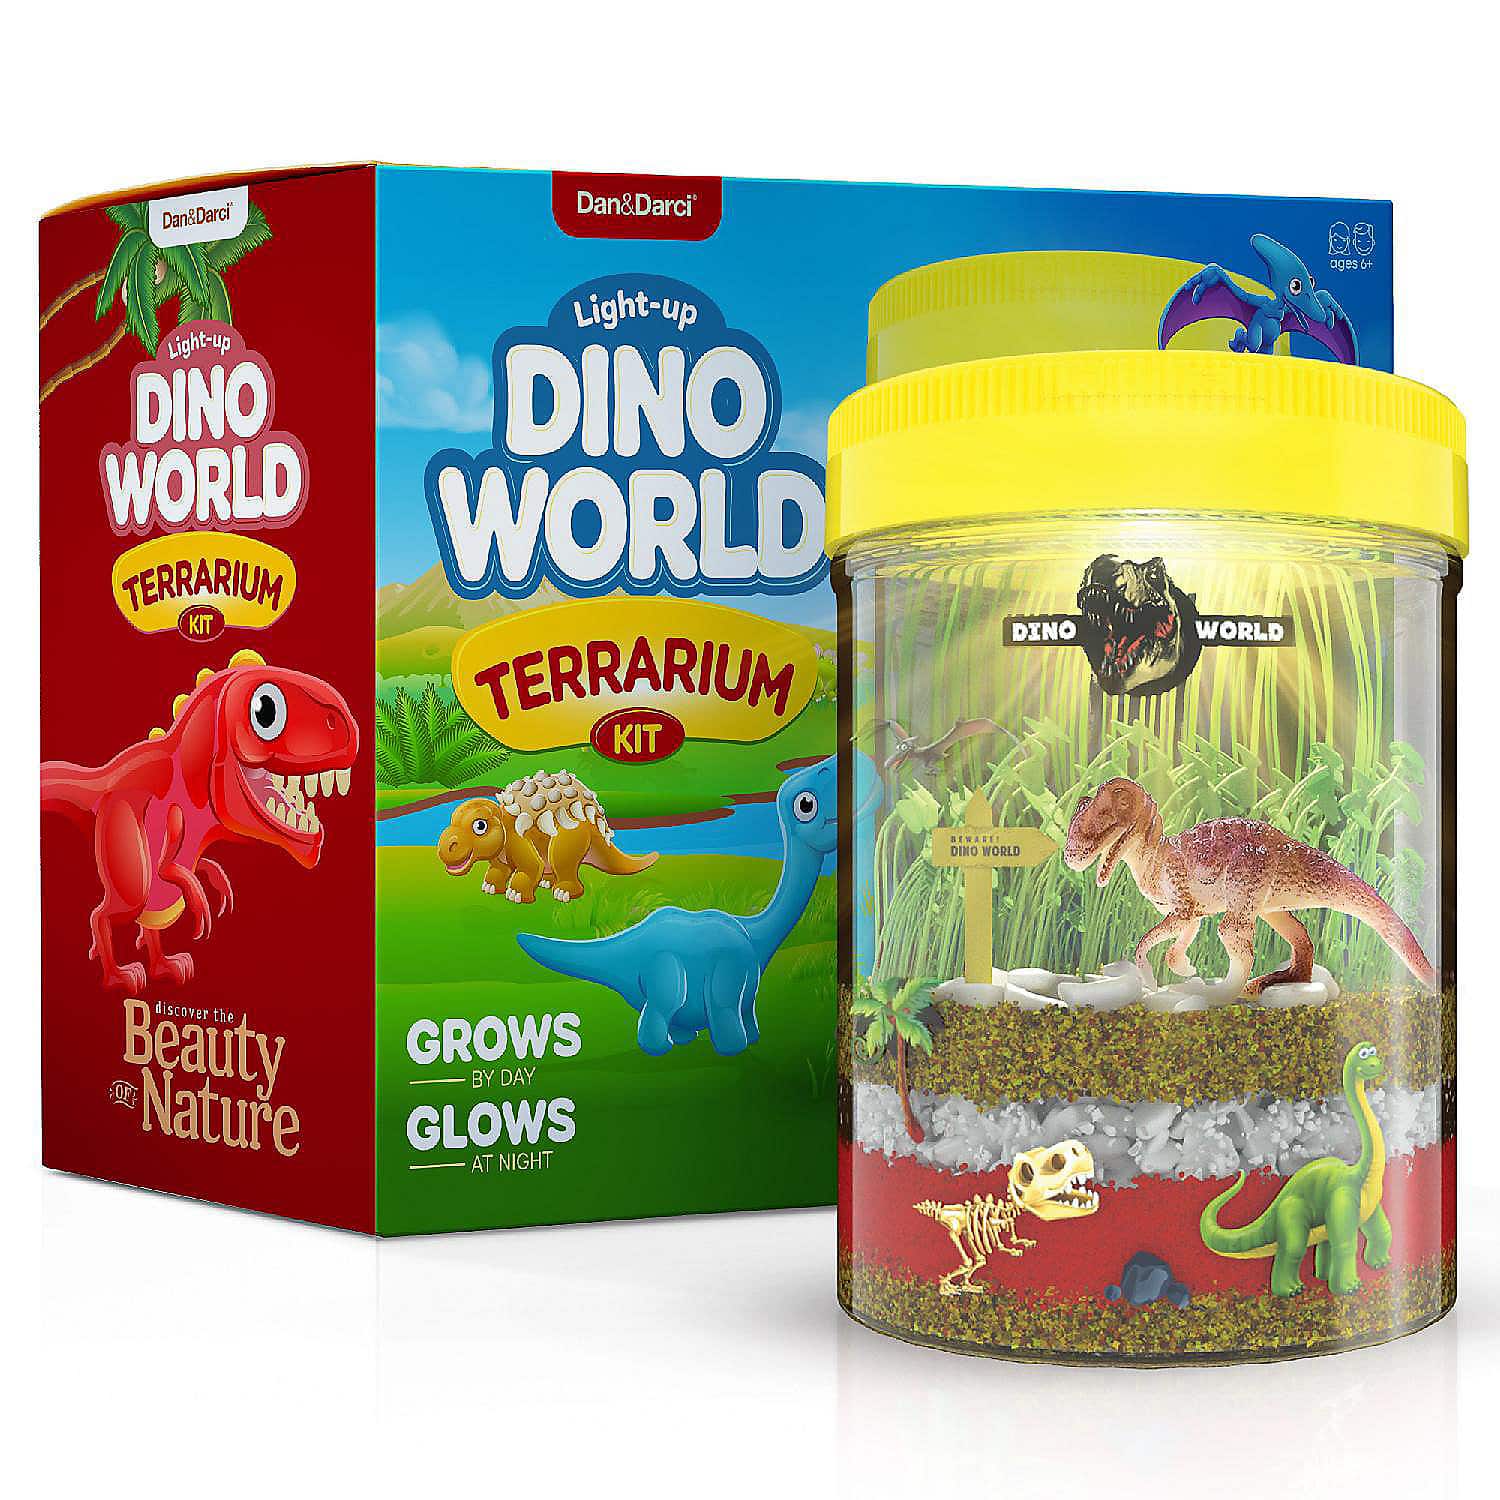 a terrarium with dinosaurs is shown in front of it's corrosponding box